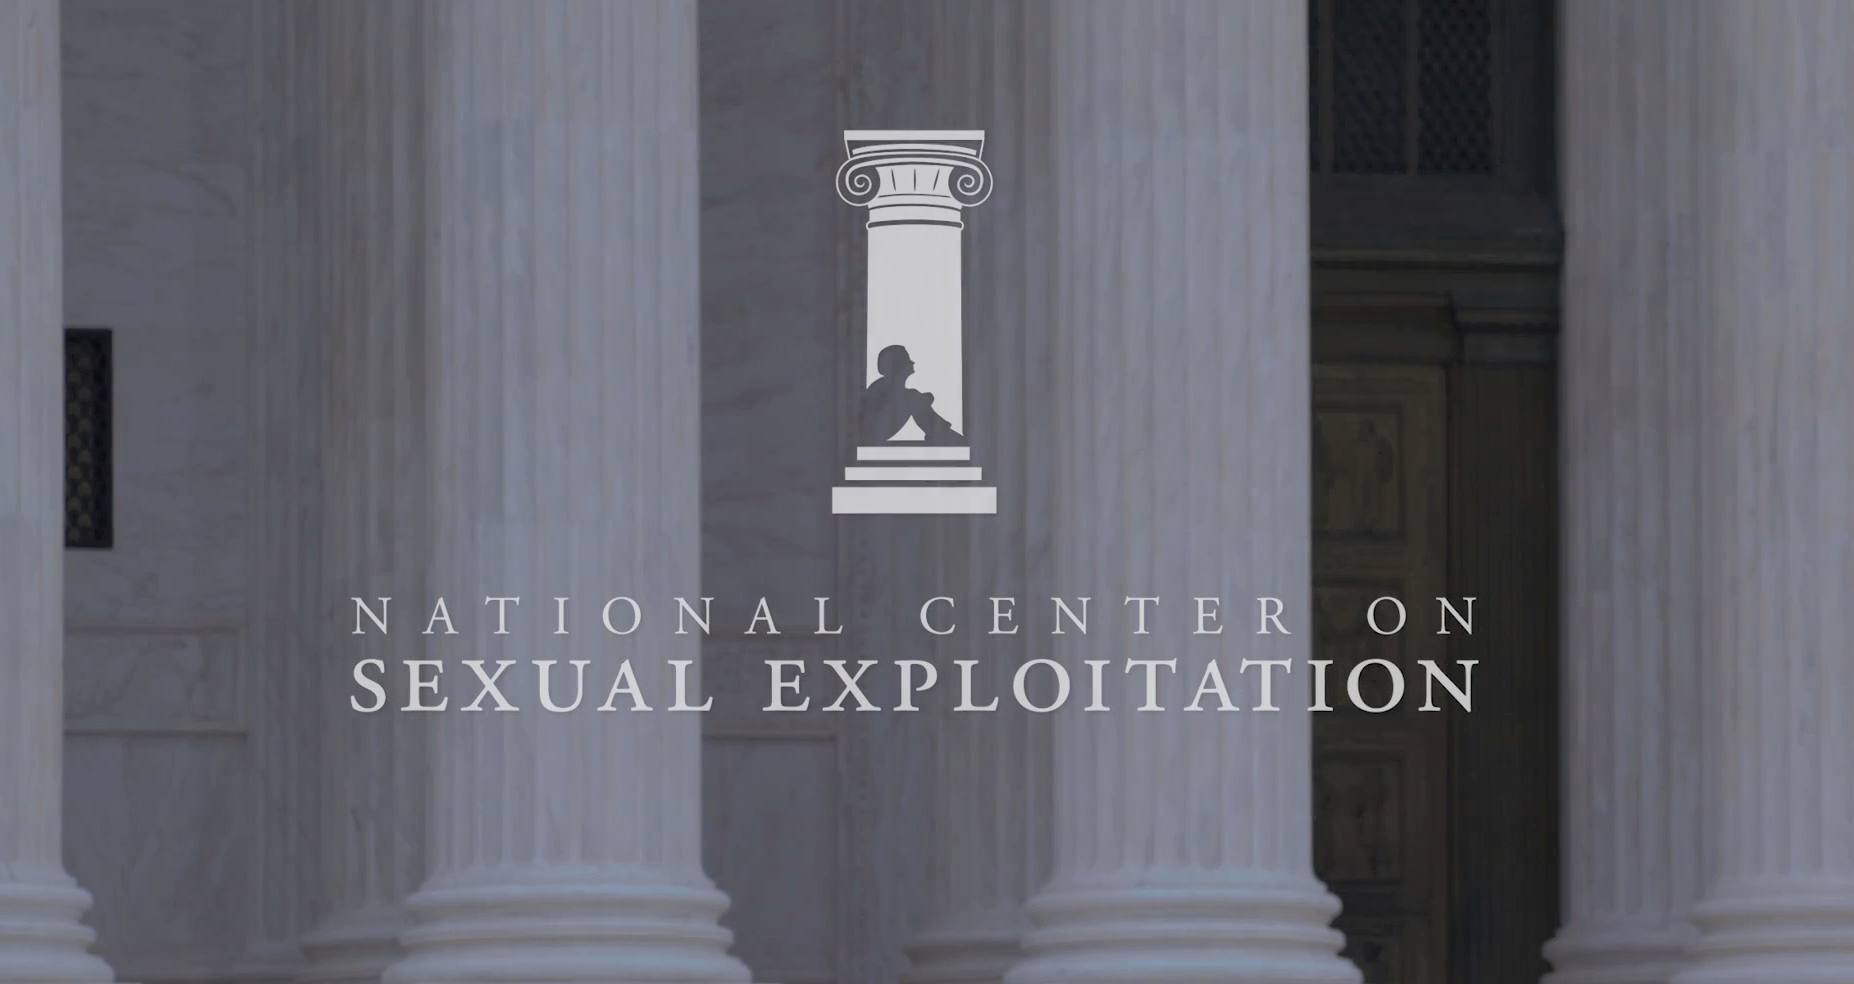 Event At The U.S. Capitol Educated Policy Makers On The Spectrum of Sexual Exploitation